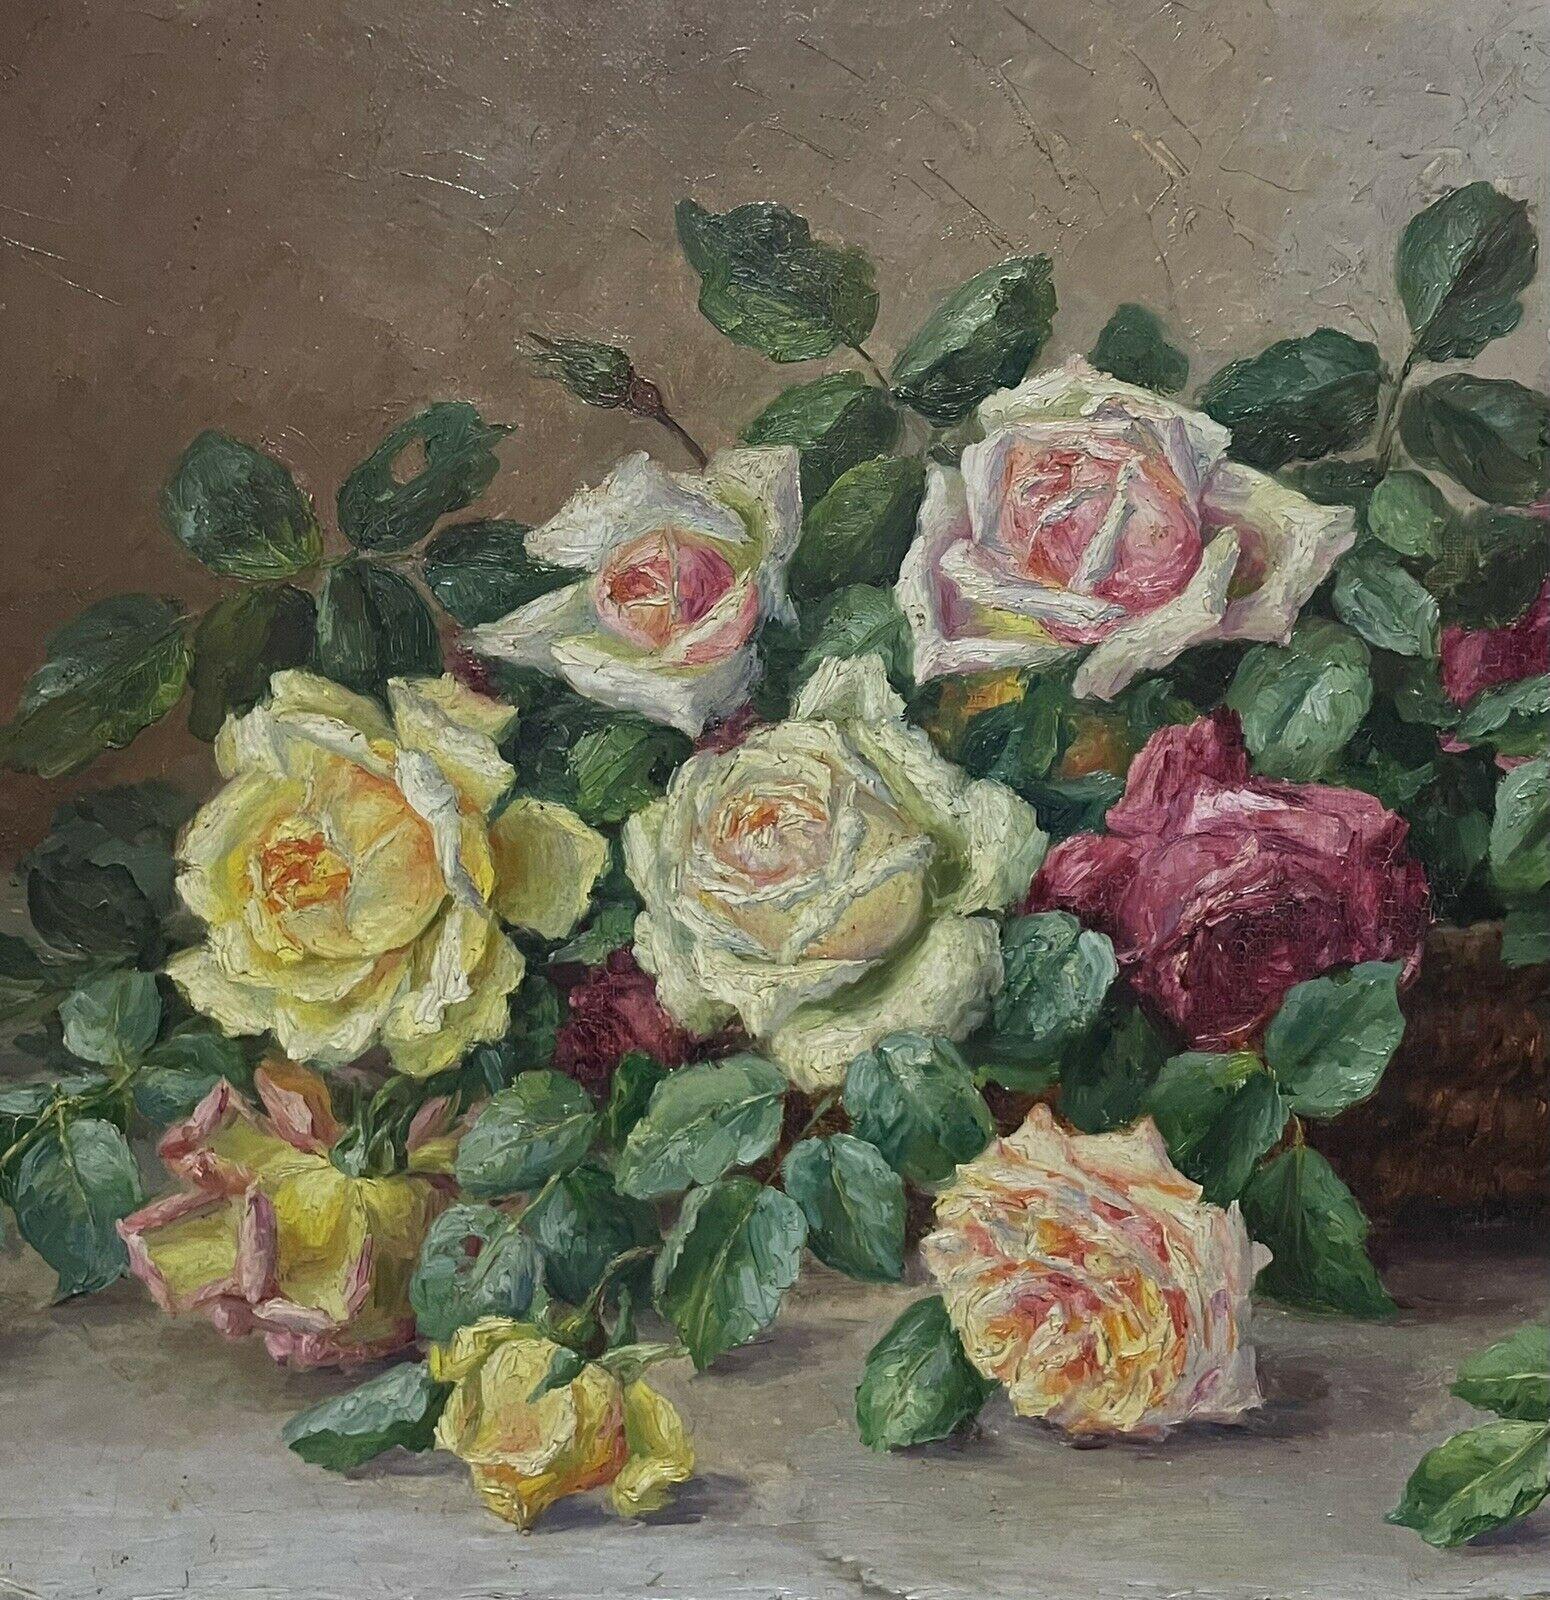 Artist/ School: French School, circa 1930's, signed by the artist lower corner

Title: Still life of roses

Medium: signed, oil painting on canvas, framed.

framed:  24 x 30.5 inches
canvas:   21 x 25.5 inches

Provenance: private collection,